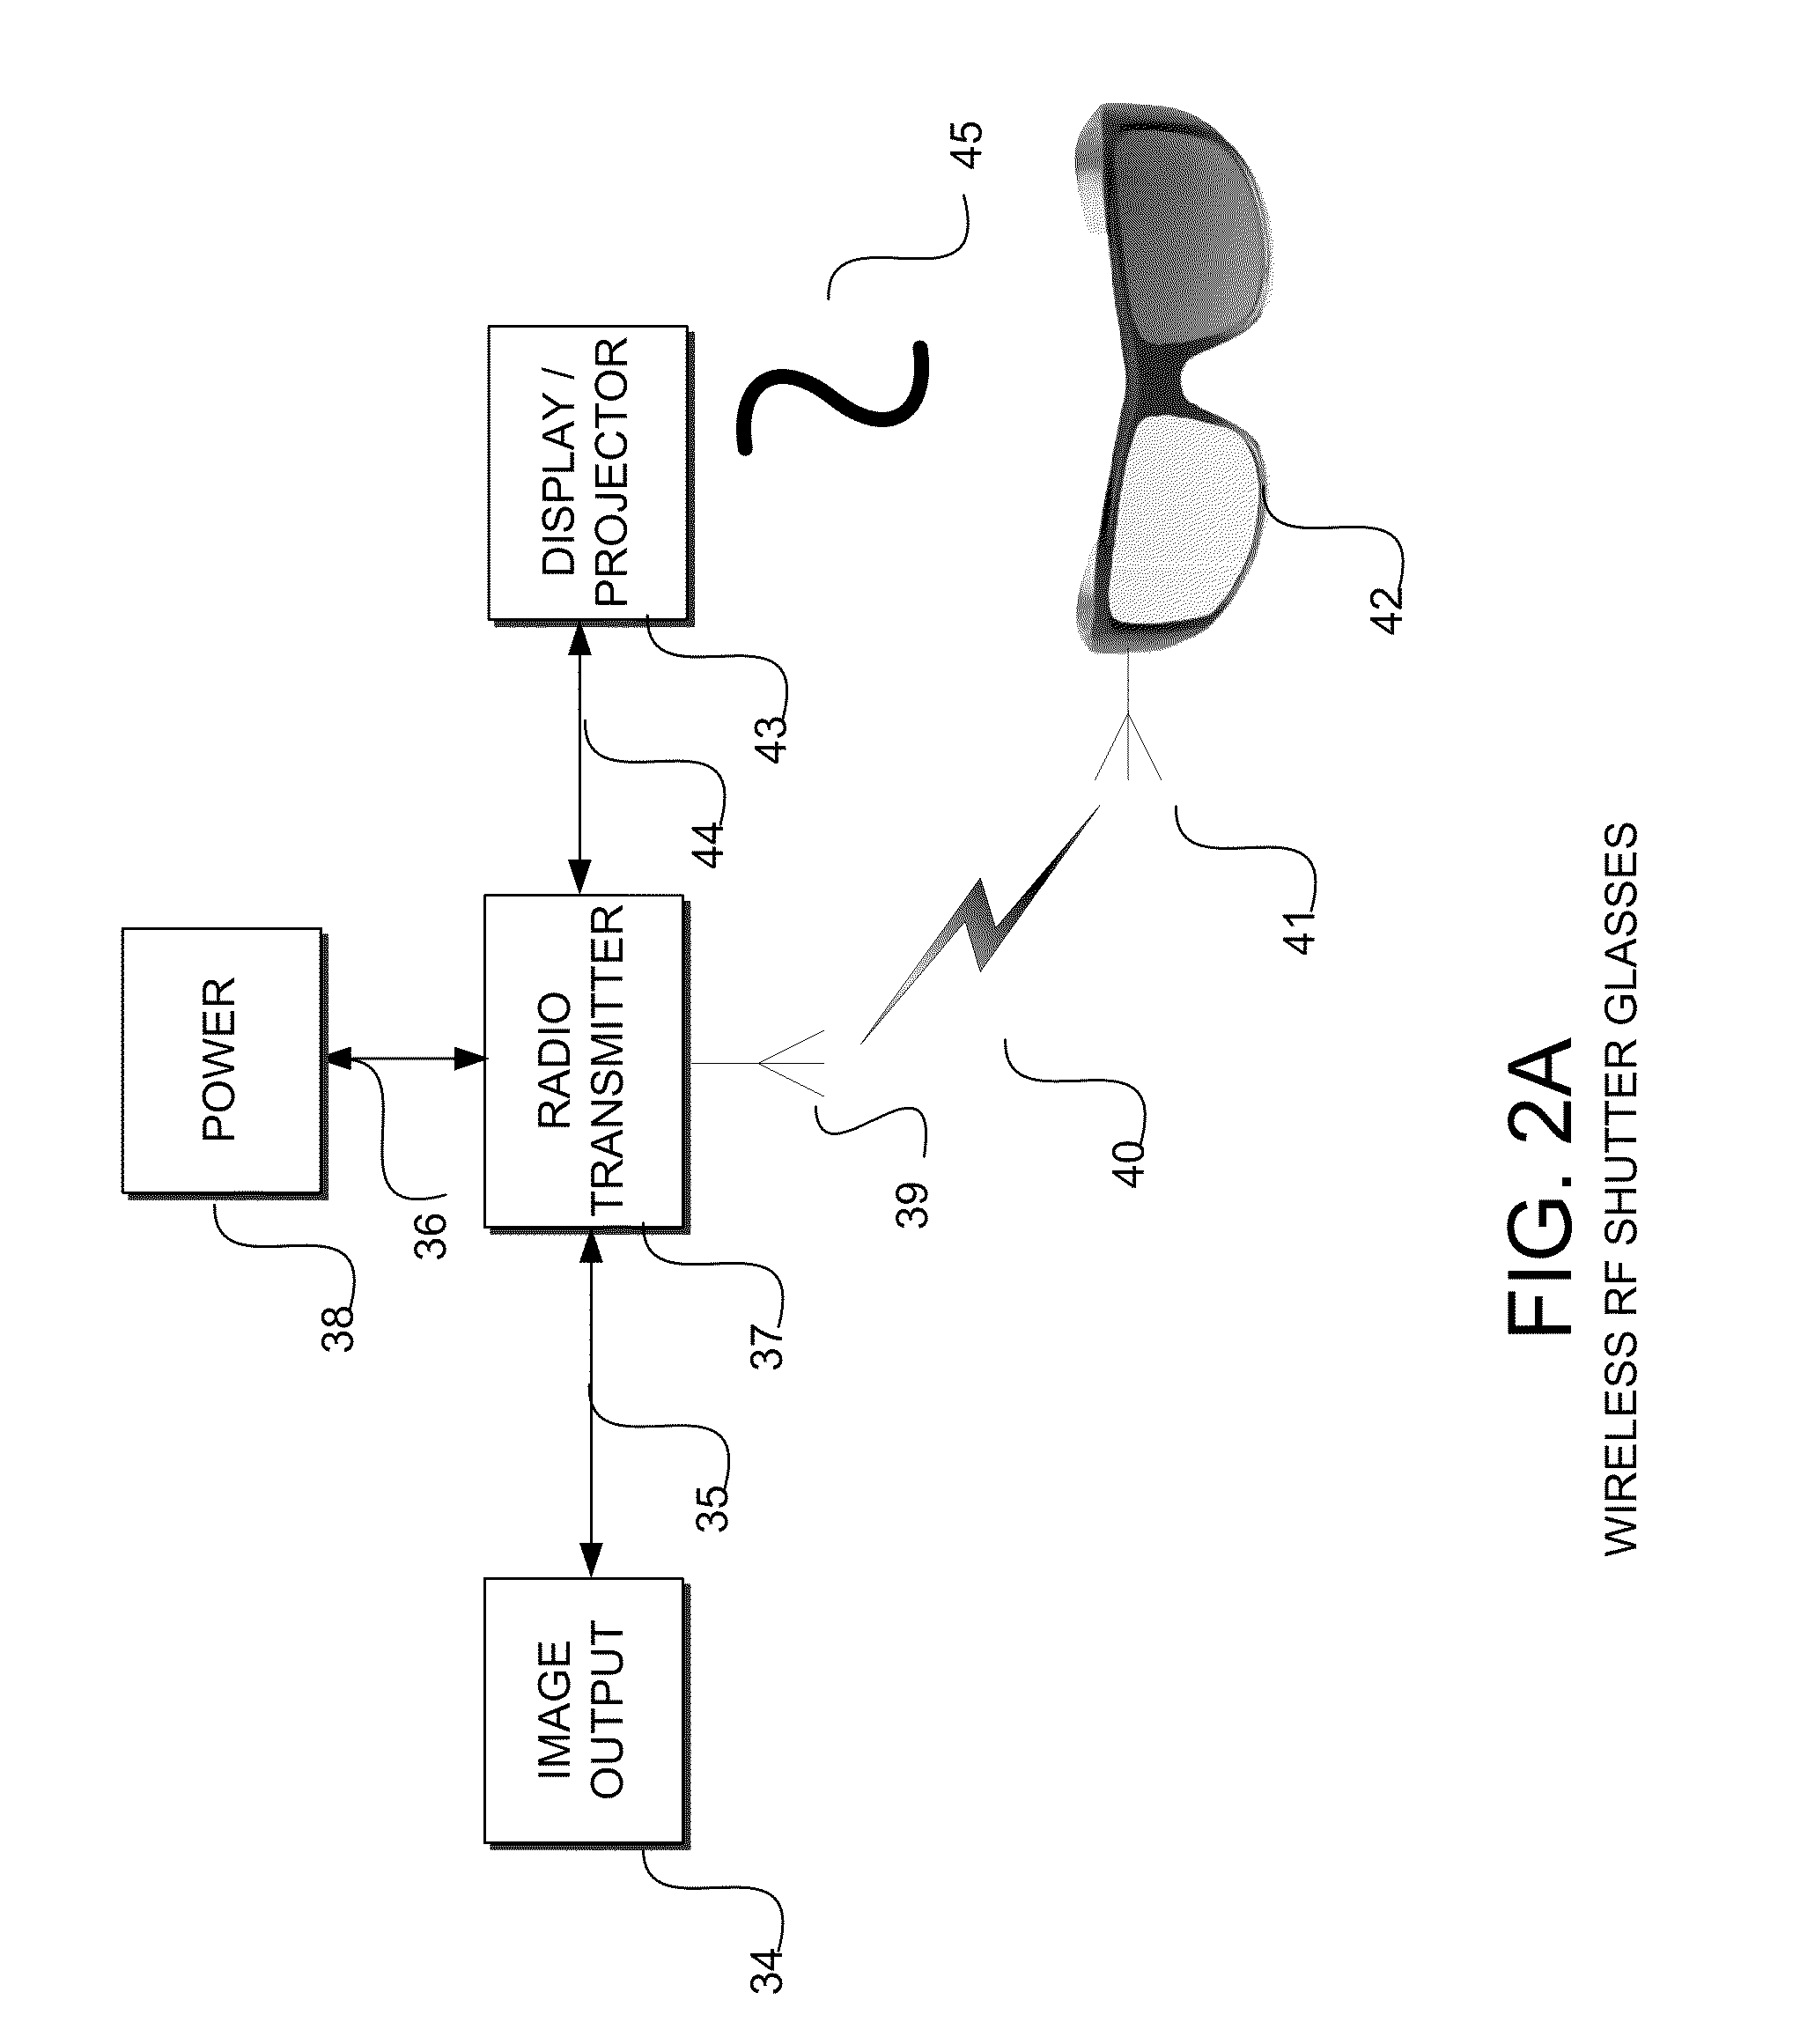 Method of stereoscopic 3D viewing using wireless or multiple protocol capable shutter glasses